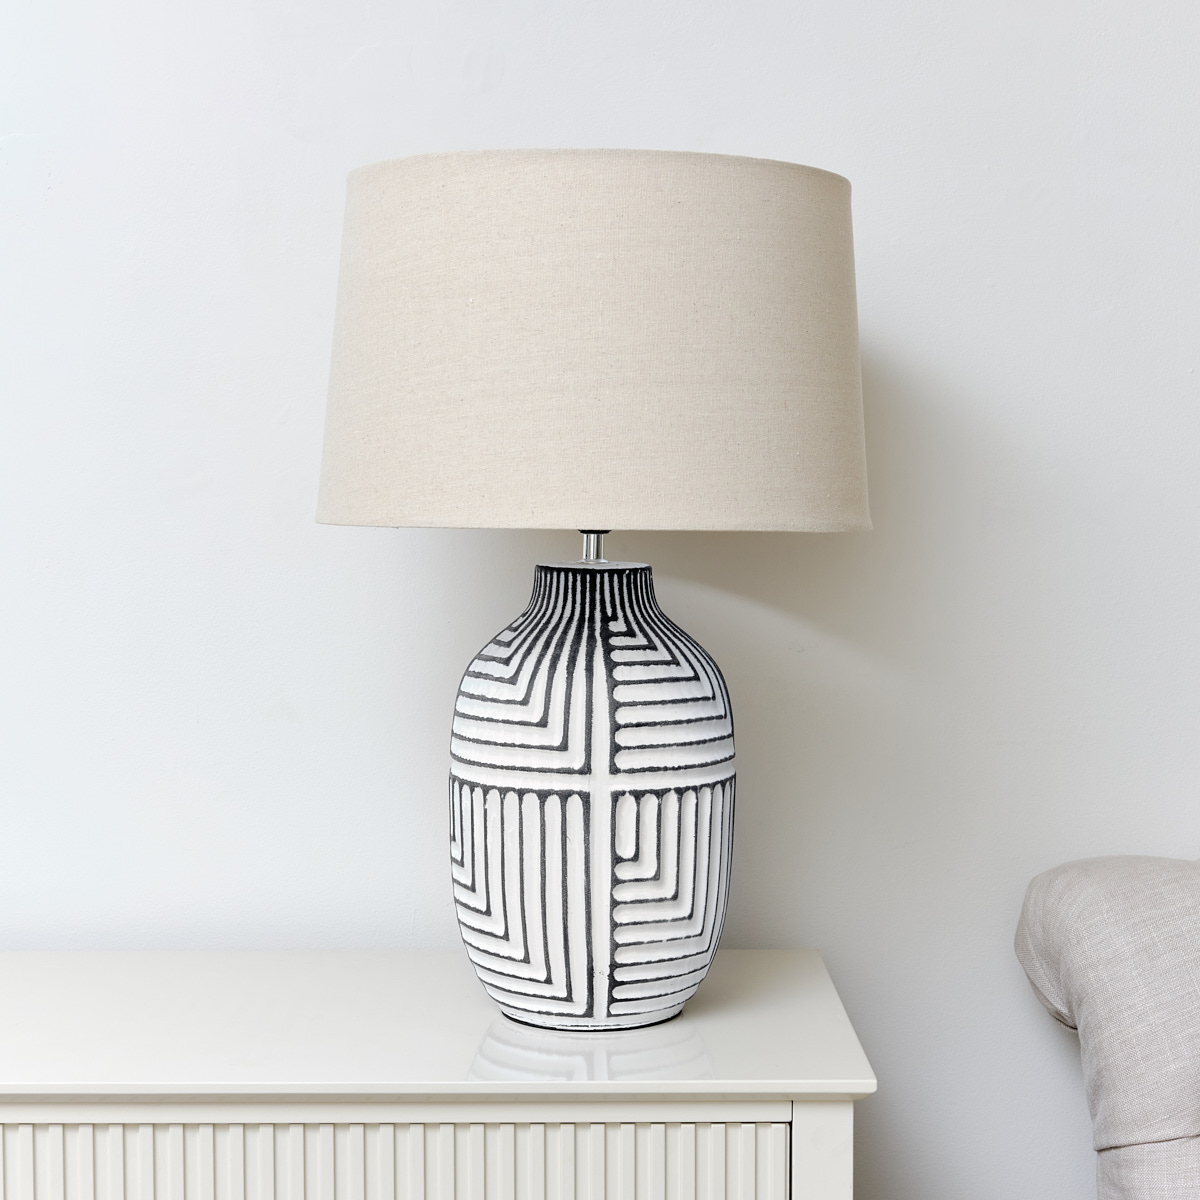 Large Abstract Monochrome Table Lamp with Beige Linen Shade